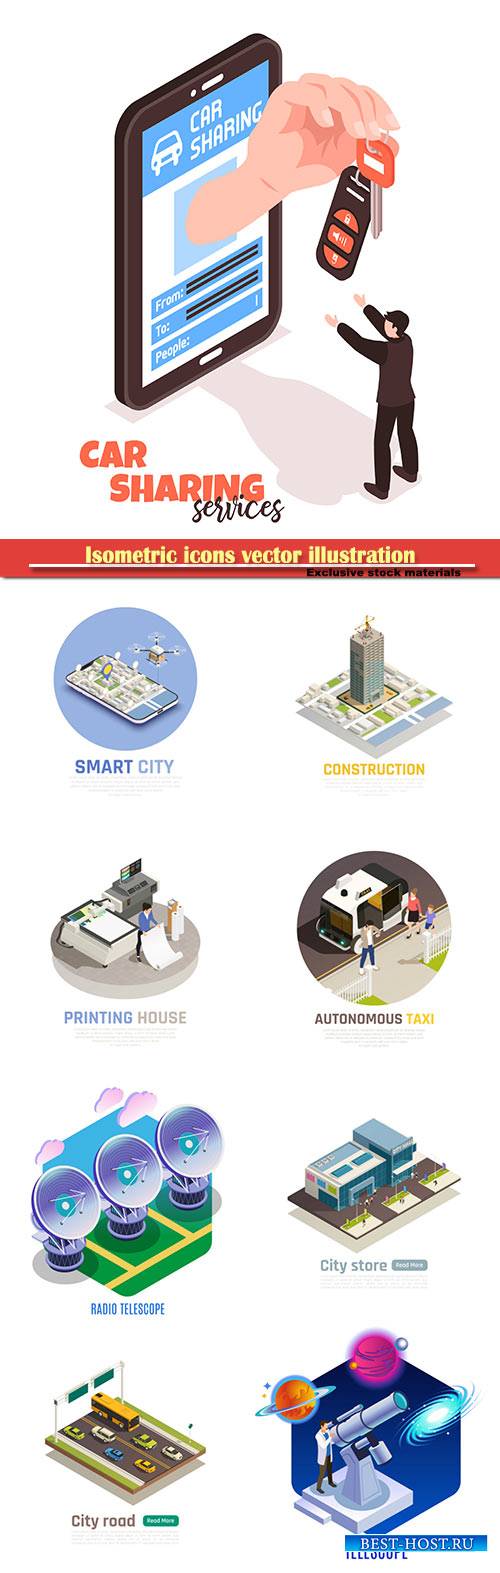 Isometric icons vector illustration, banner design template # 34